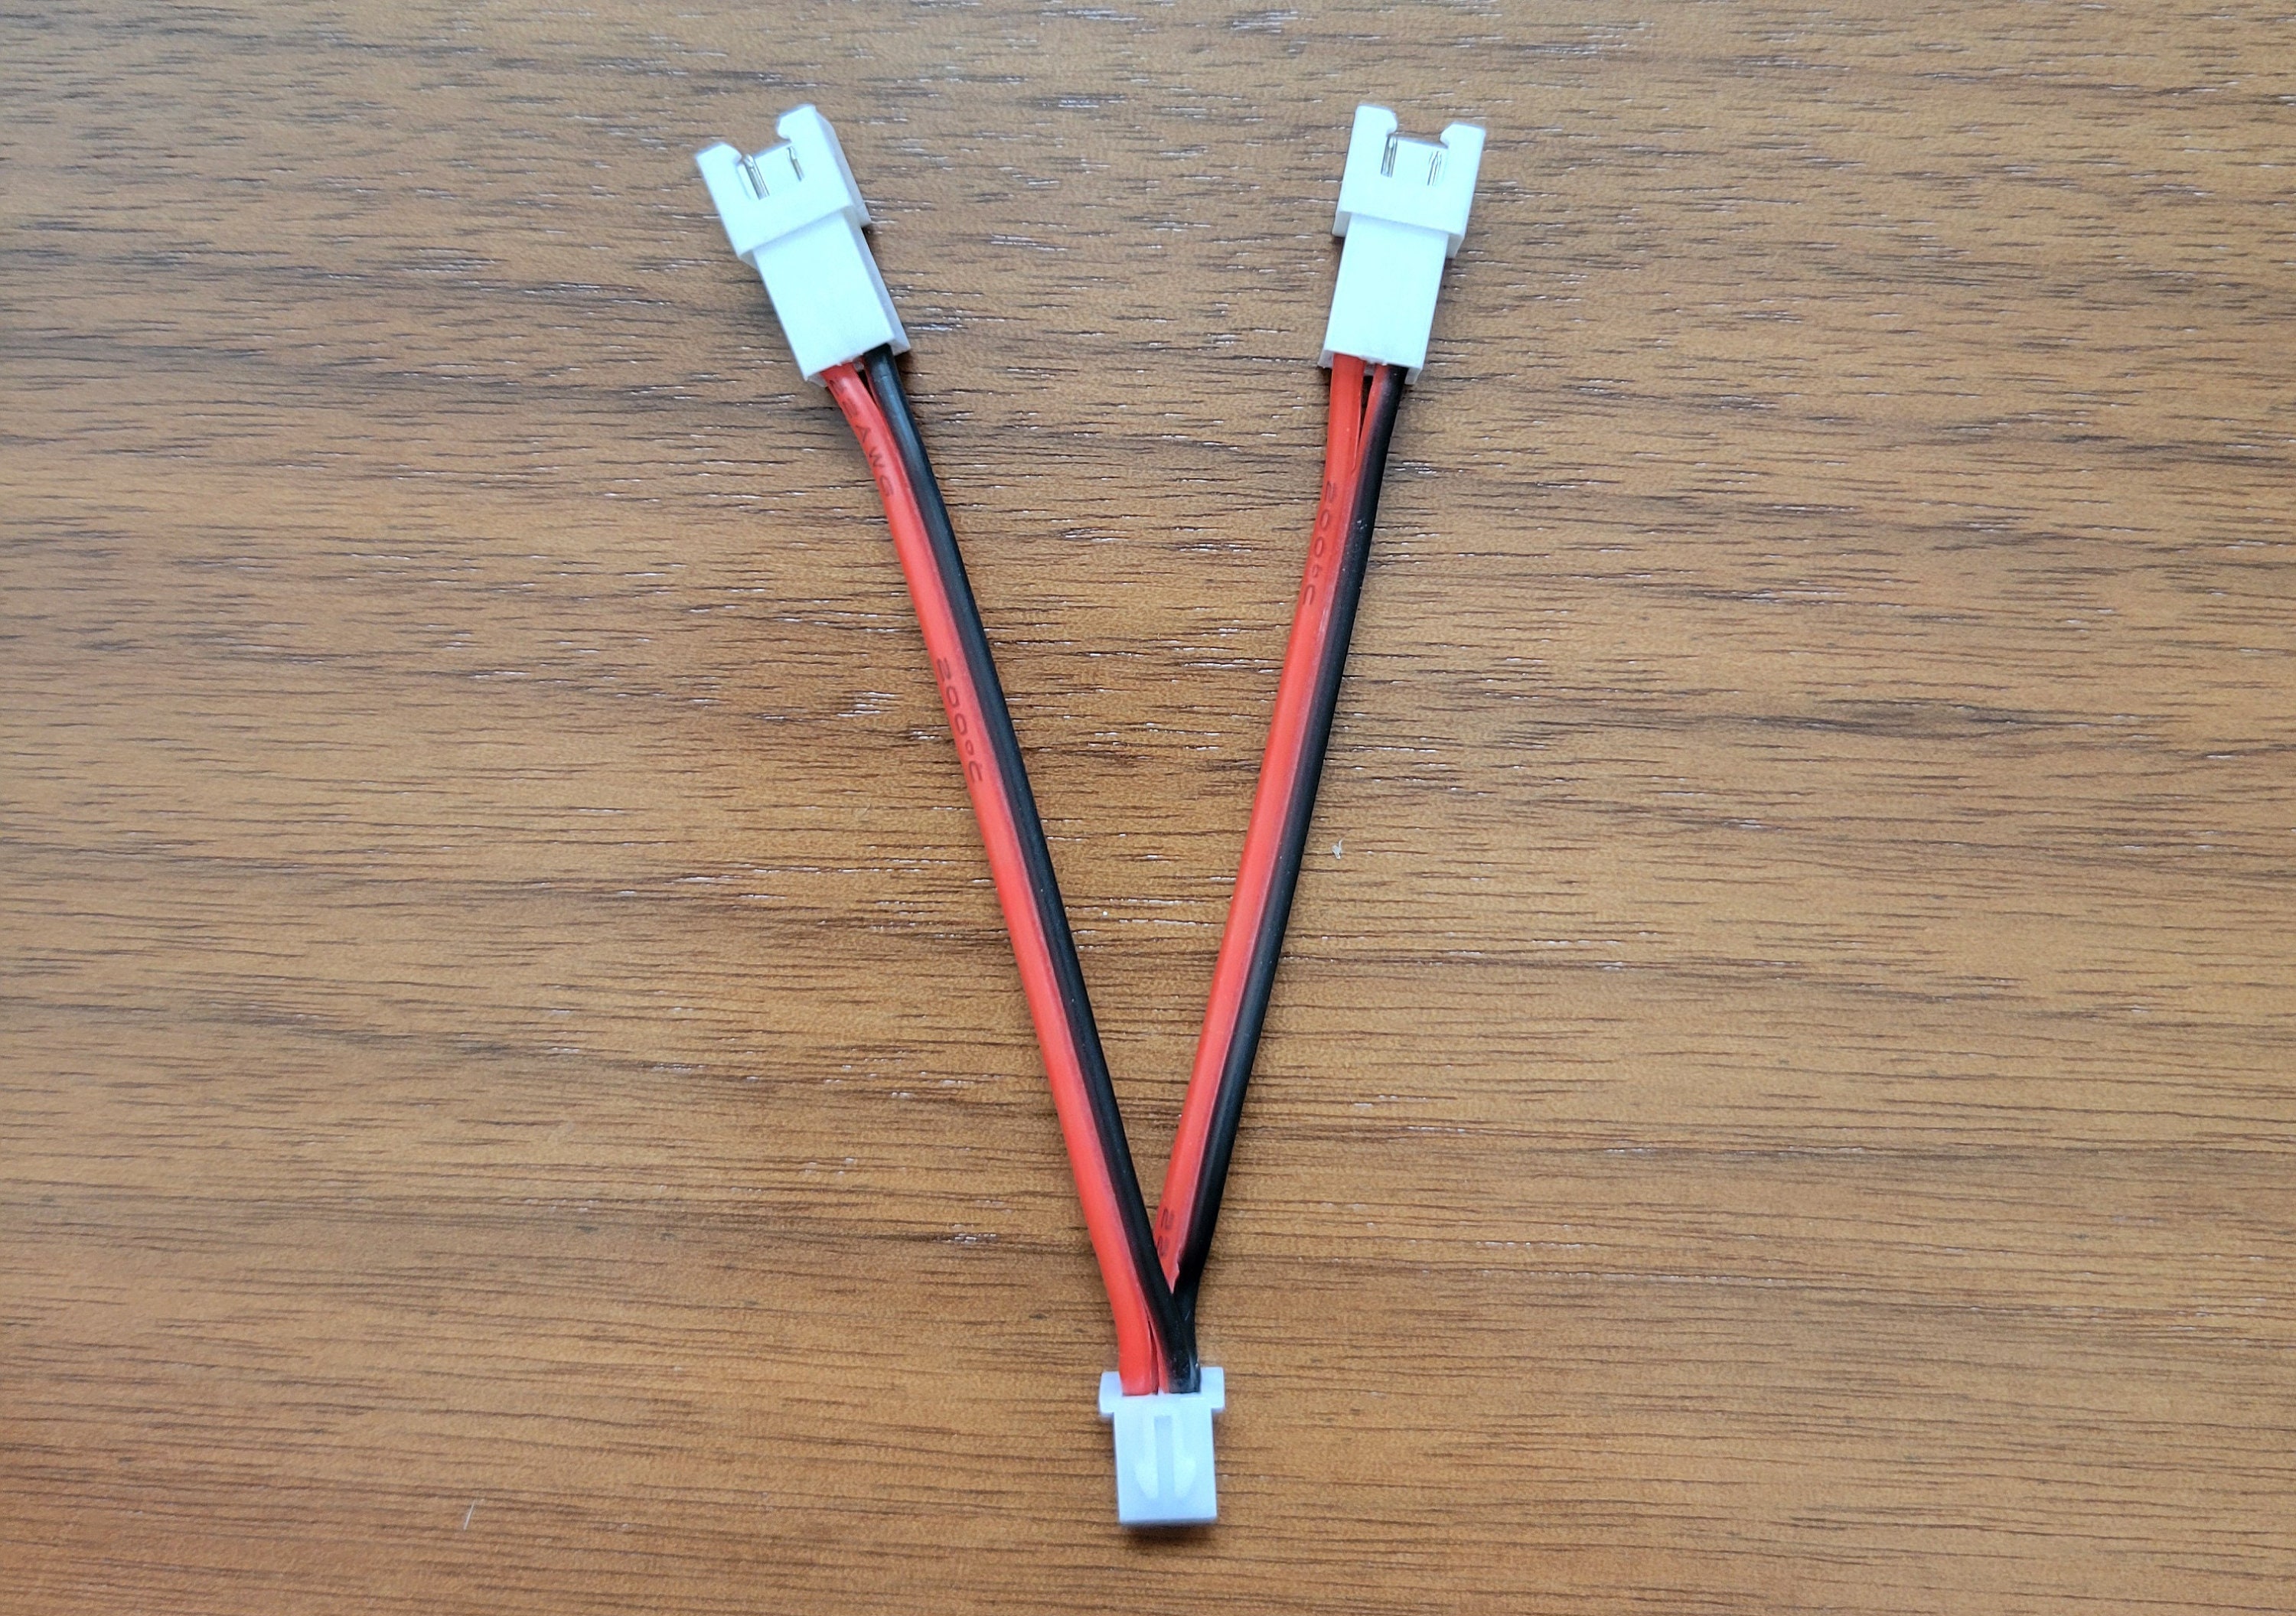 22 Awg Wires 